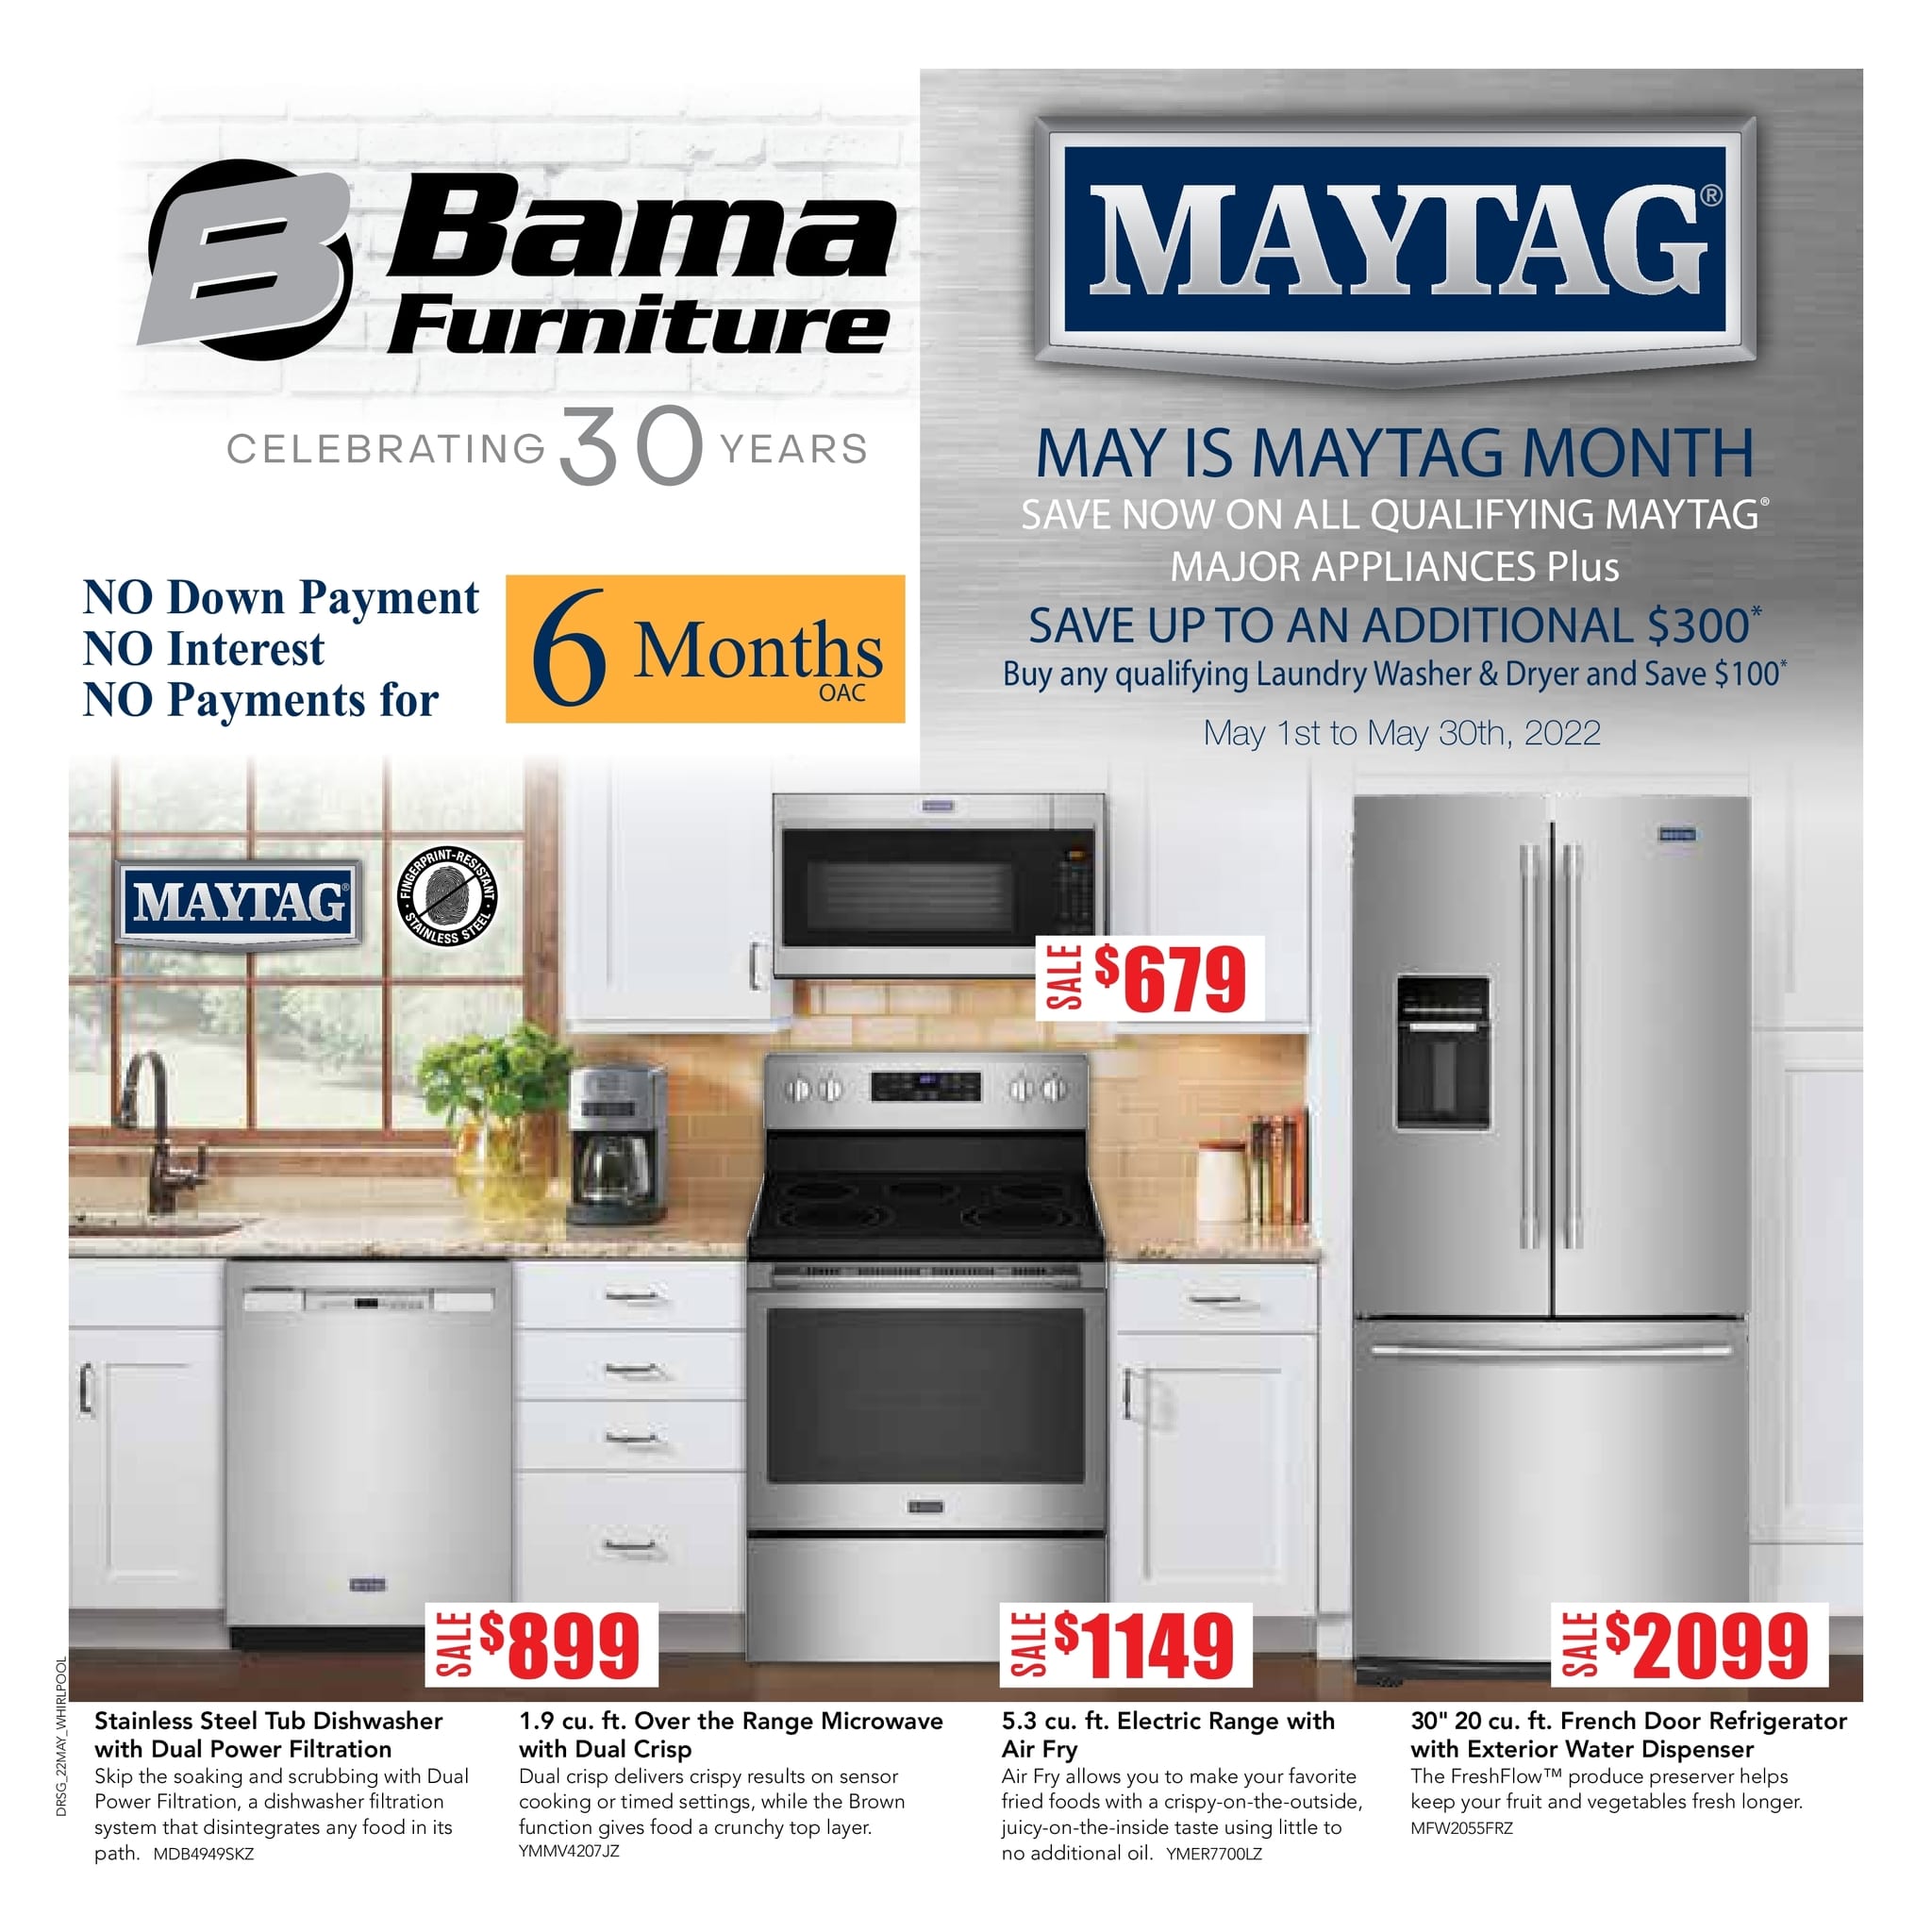 Bama Furniture - May is Maytag Month